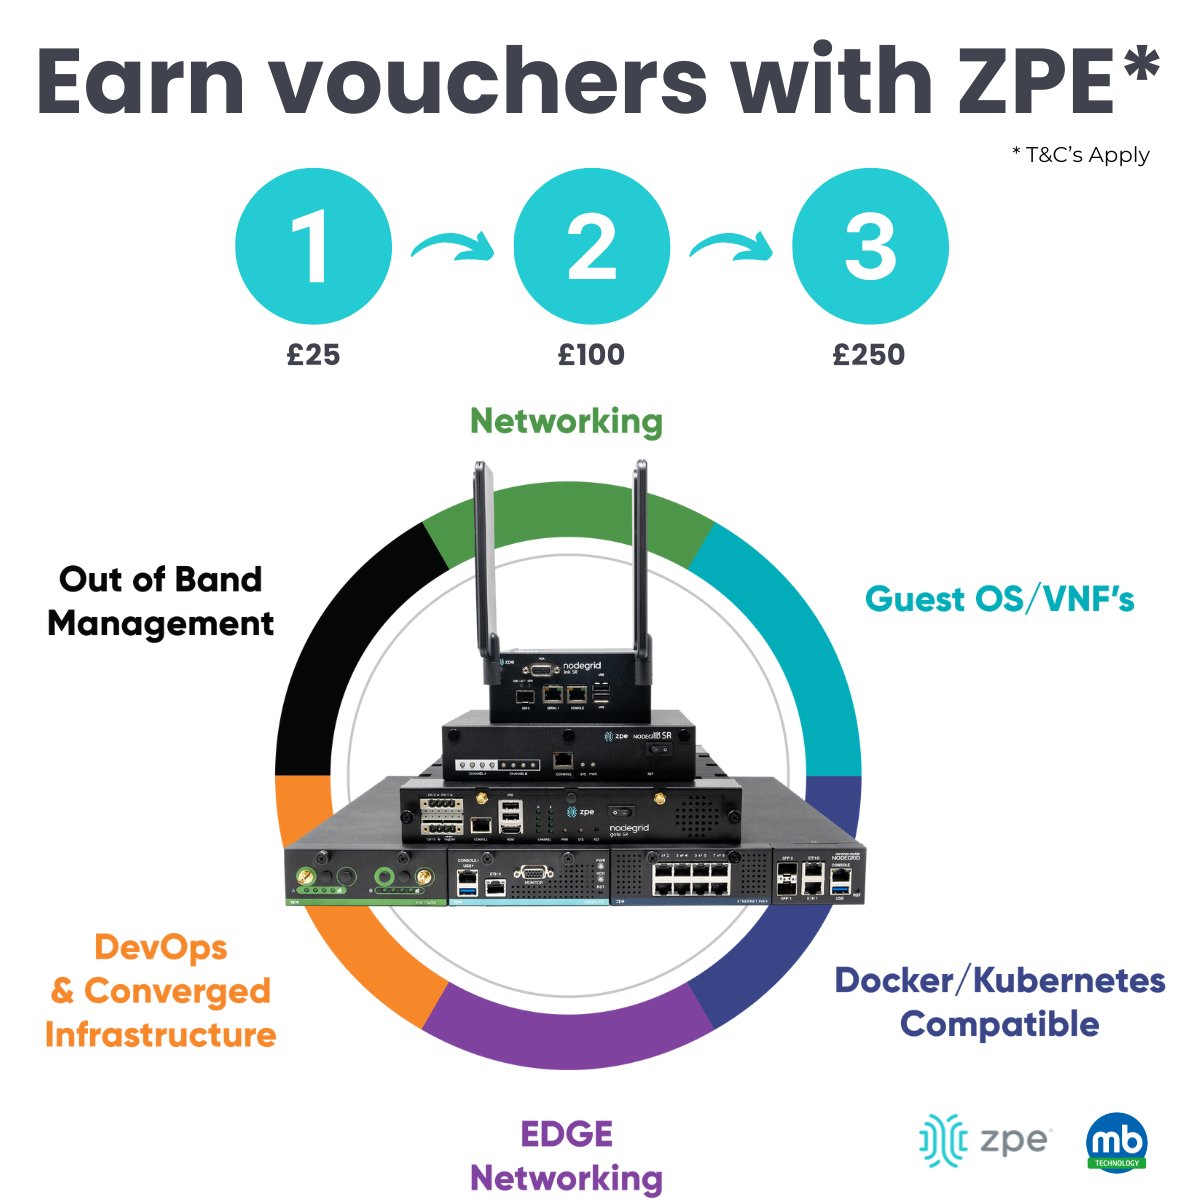 💰 Explore a lucrative opportunity, IT Resellers!

Earn up to £250 per opportunity by setting up meetings, securing approved deal registrations, and closing deals.

Learn more and register your opportunities now : ow.ly/VAh050RAnck

#FridayFreebie #ZPESystems #MBTechnology